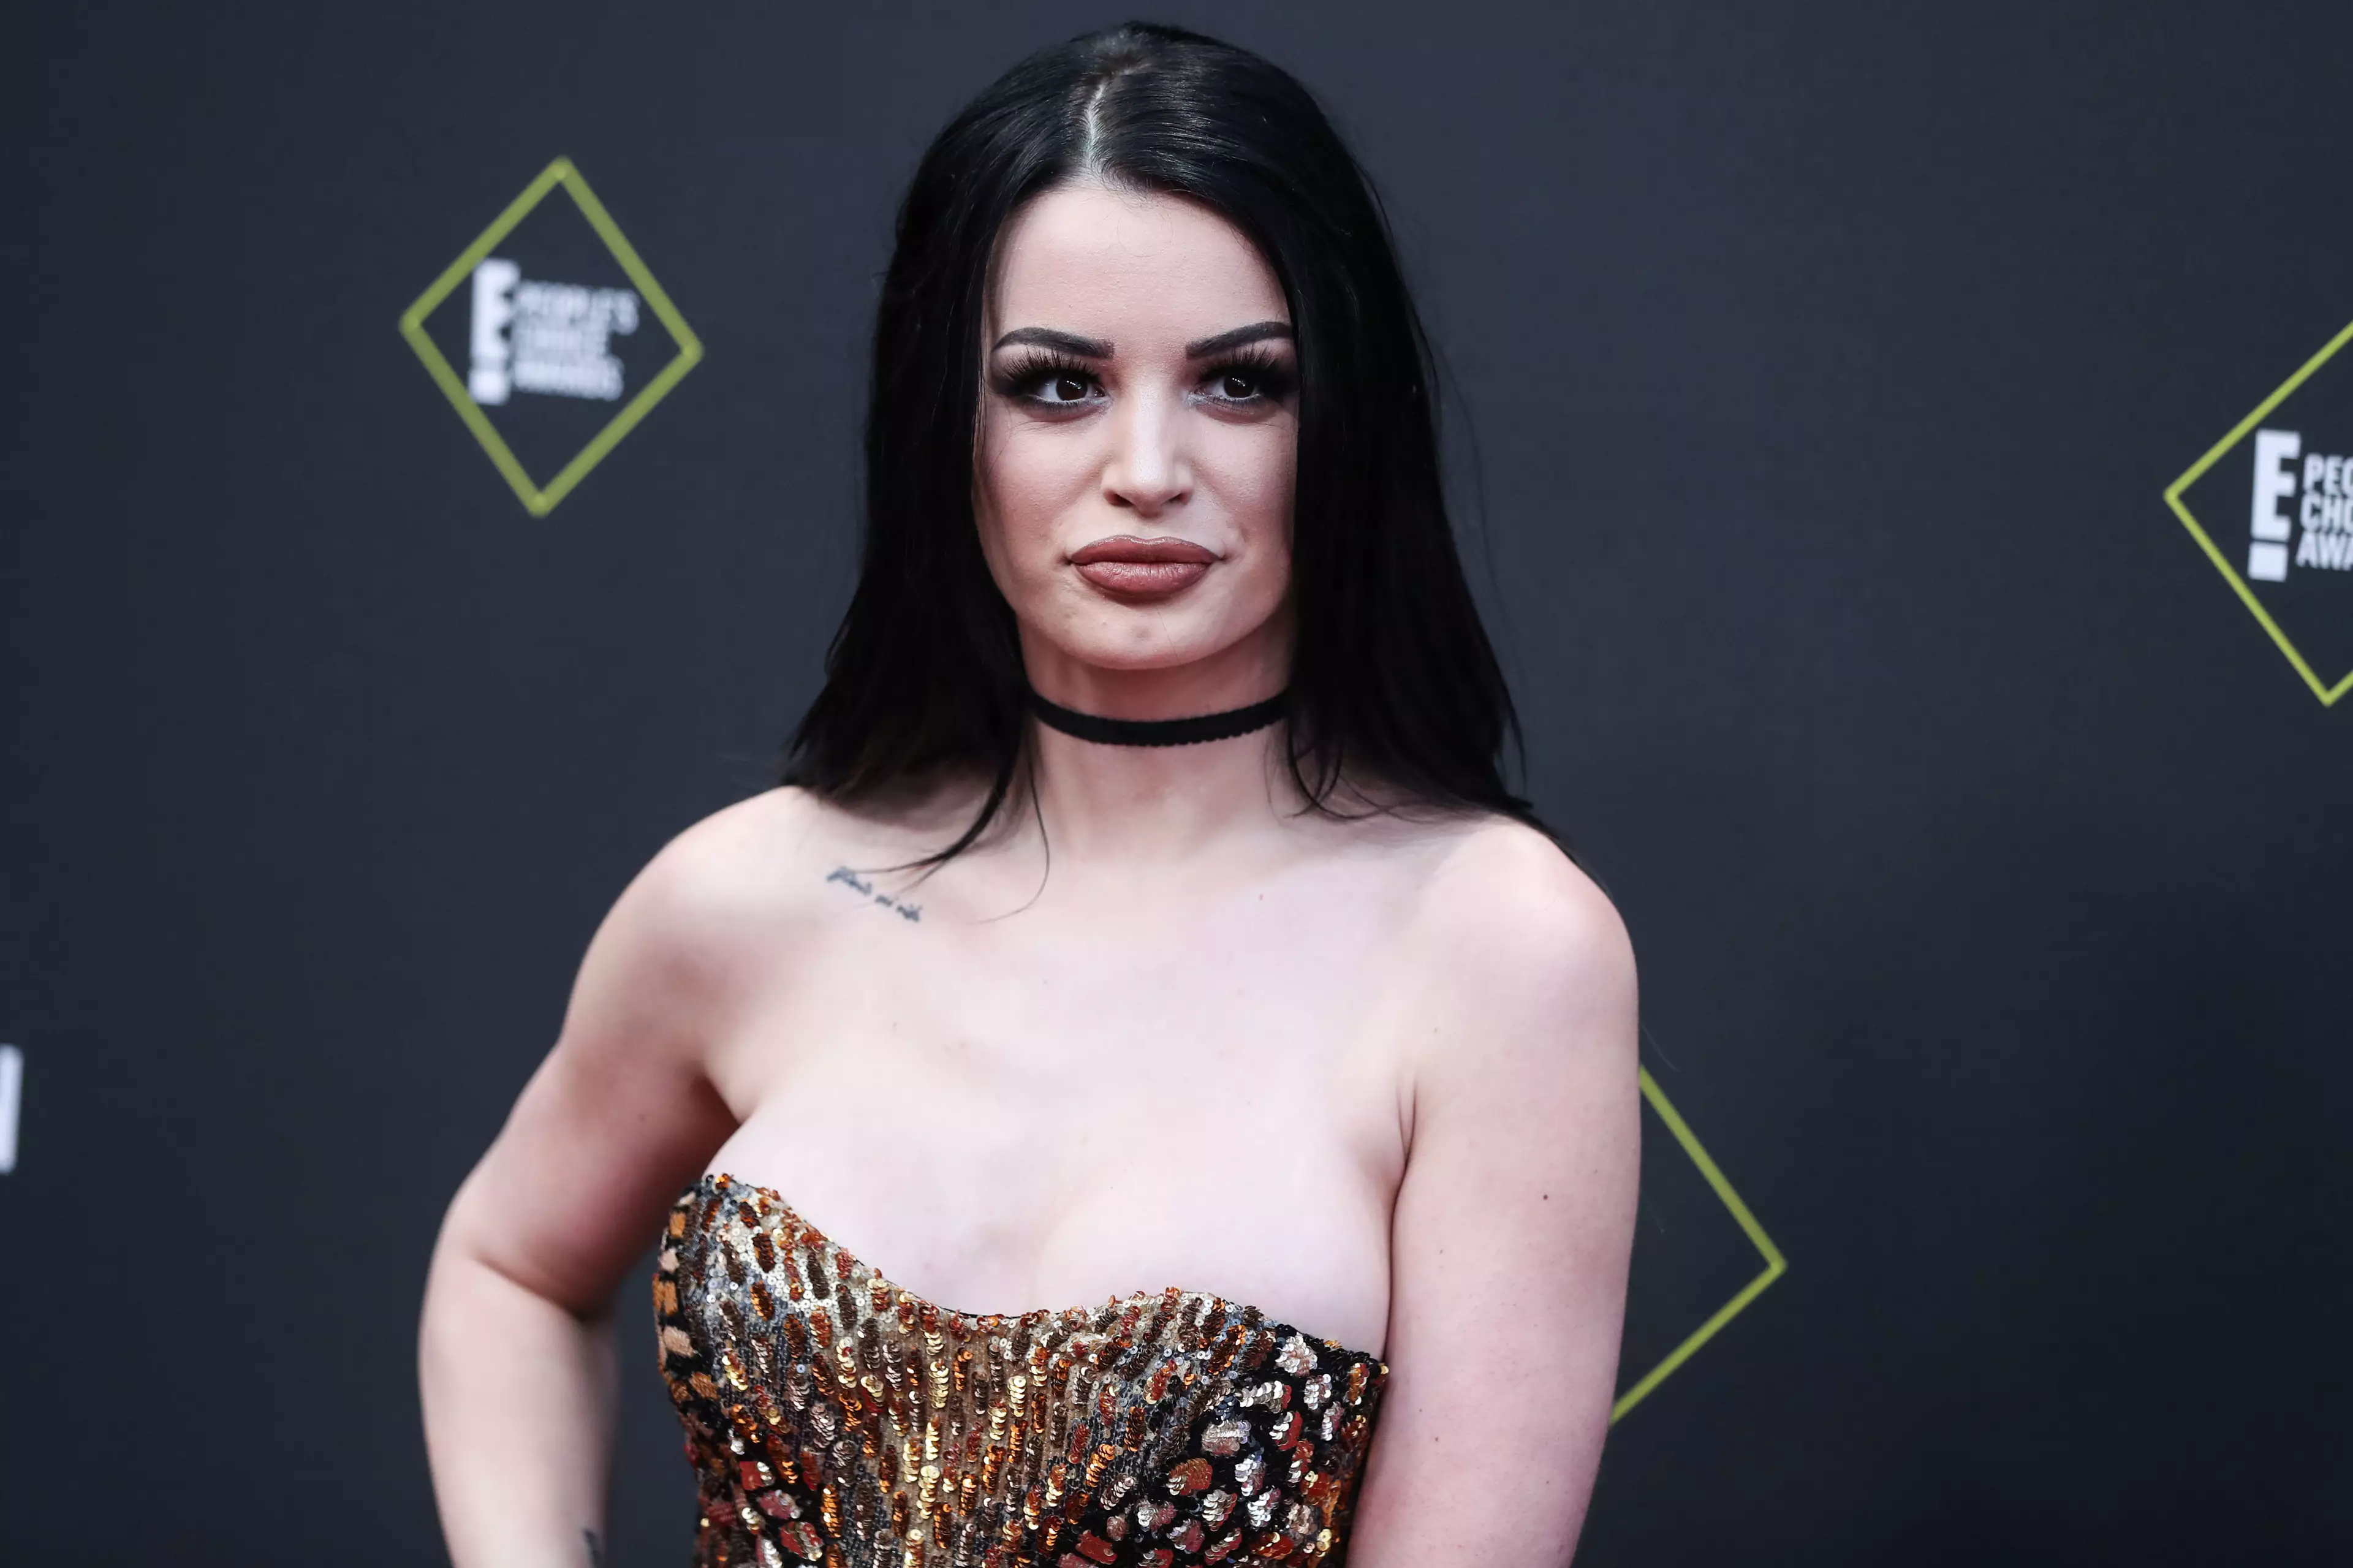 WWE star Paige said Triple H has apologised for the comment.